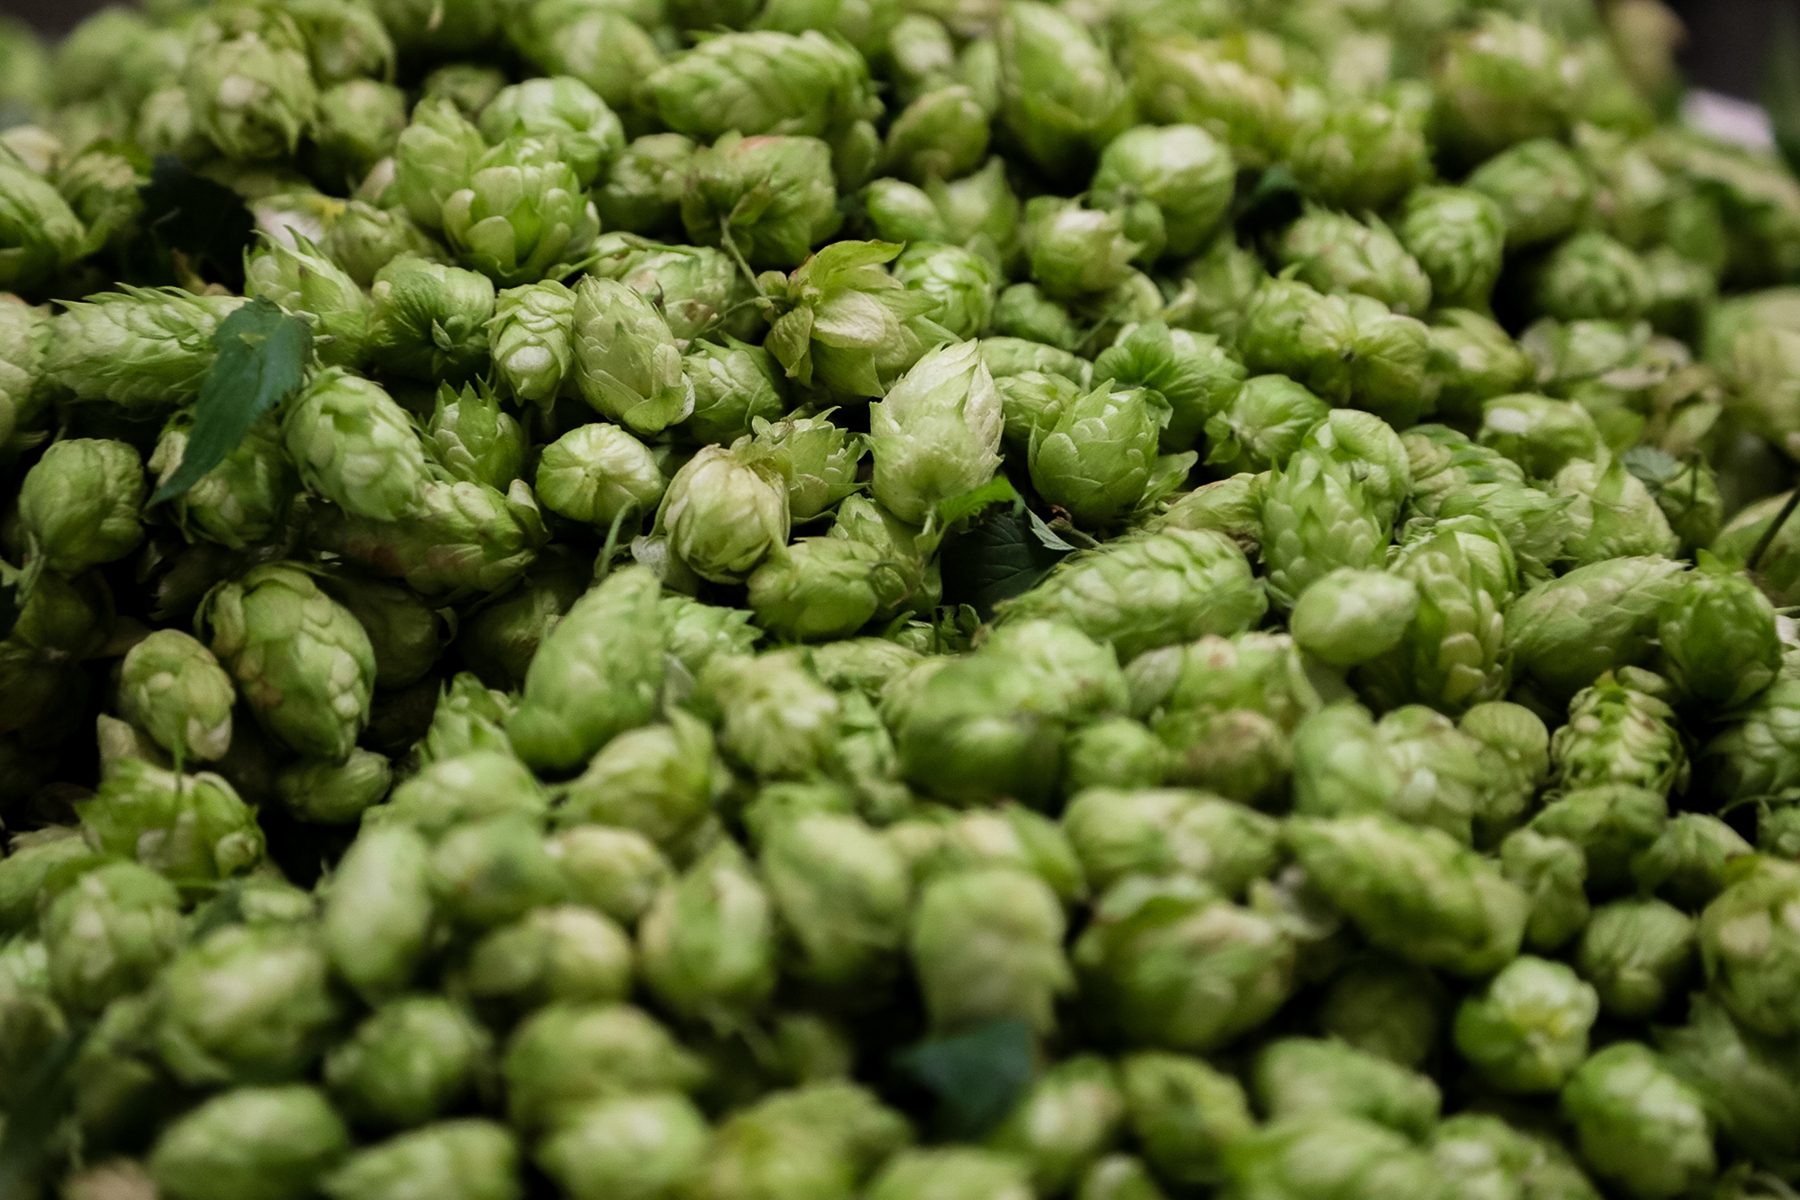 Close view of hops immediately after harvesting